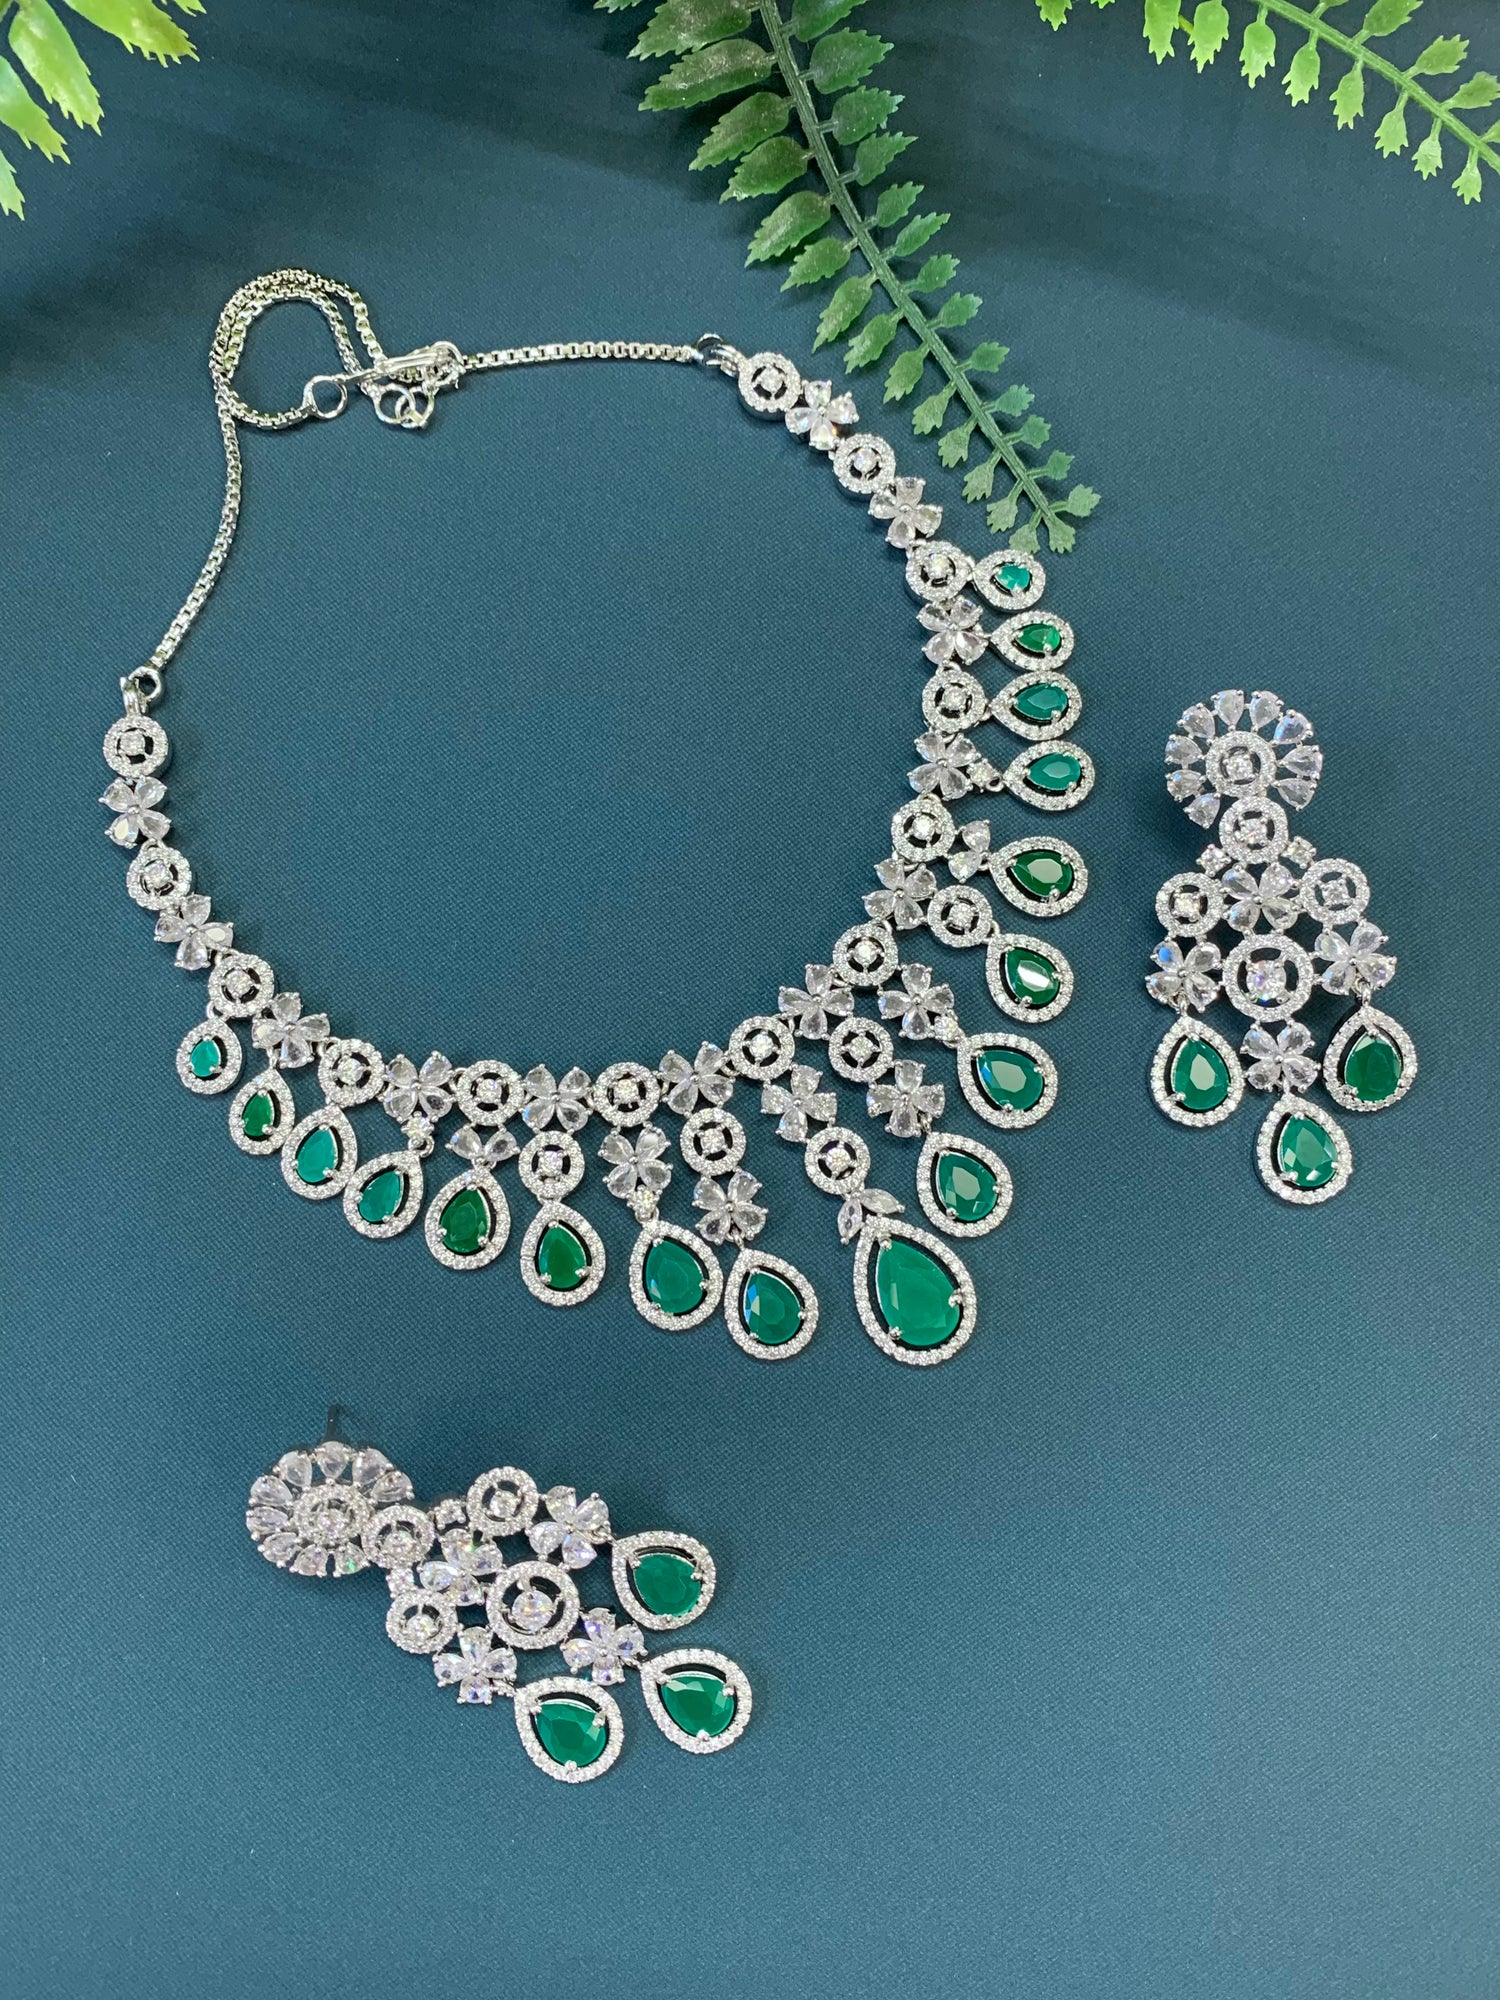 Emerald Green CZ Necklace Indian Necklace American Diamond Necklace Set  Indian Jewelry Pakistani Jewelry Crystal Necklace Statement Jewelry - Etsy  | Necklace set indian, Instagram jewelry, American diamond necklaces